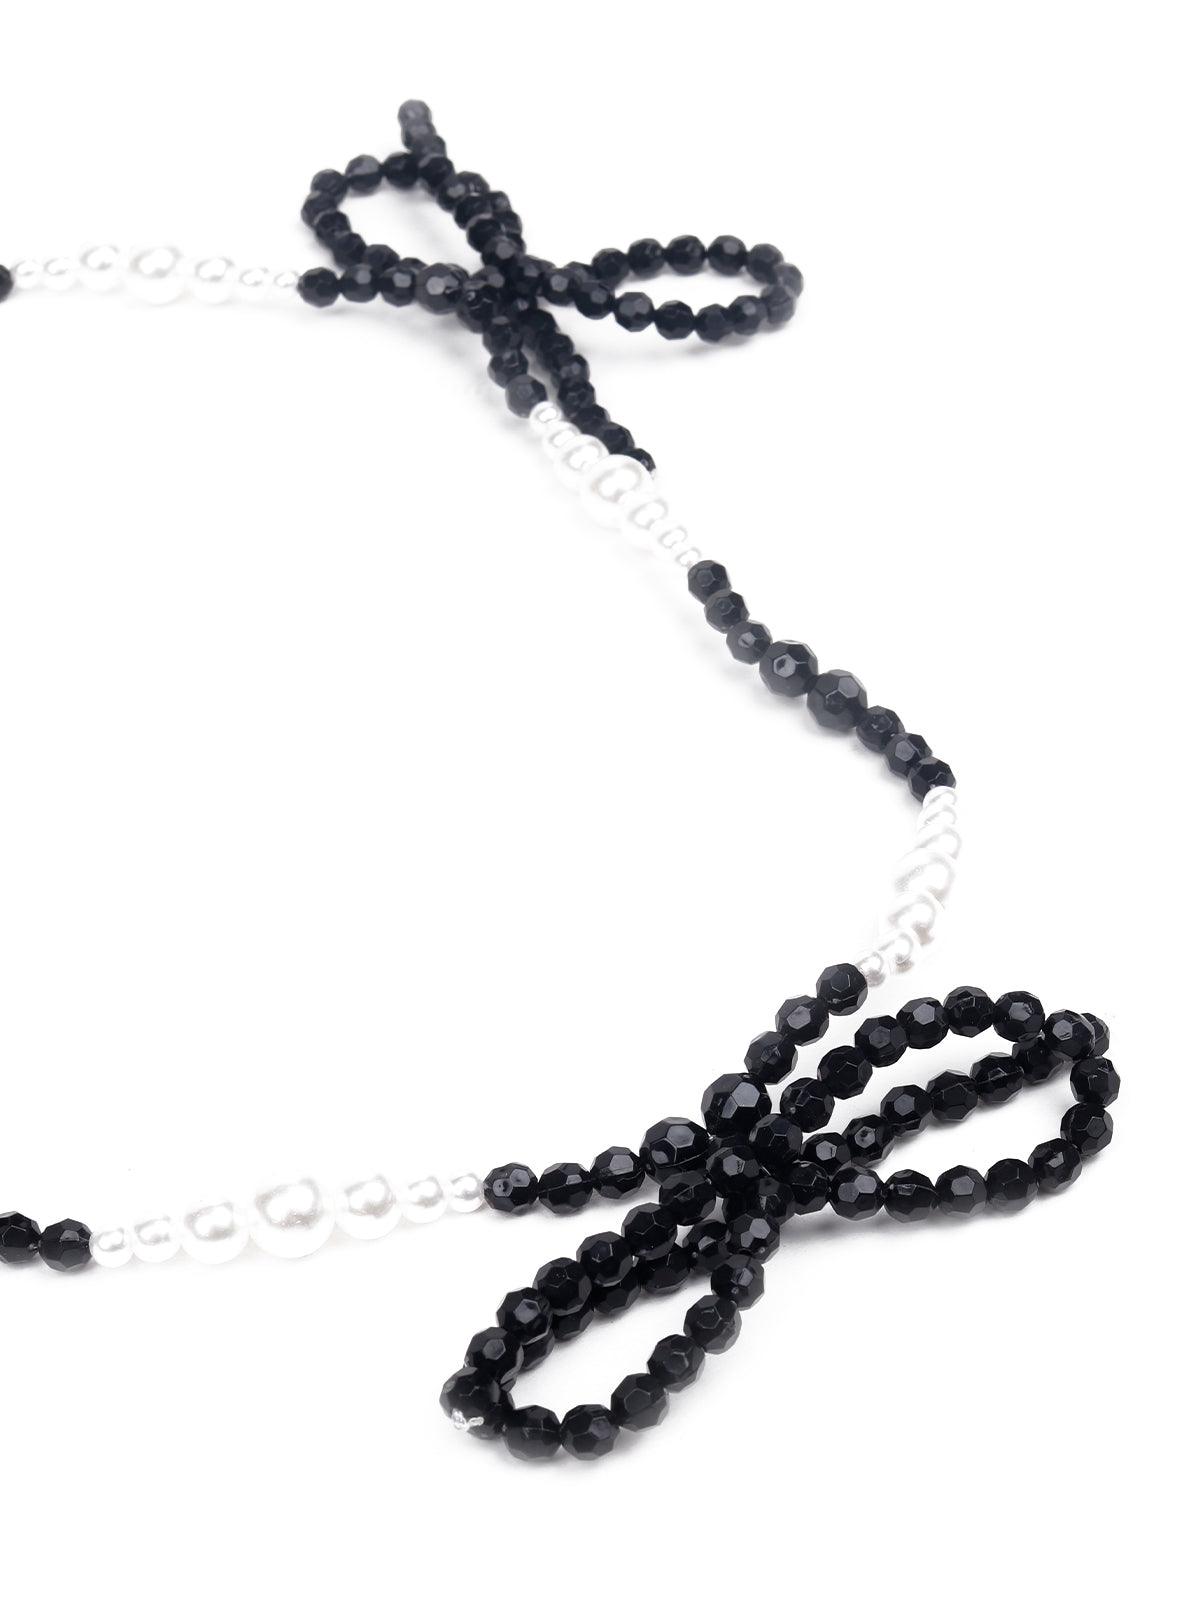 Black and white stunning necklace - Odette